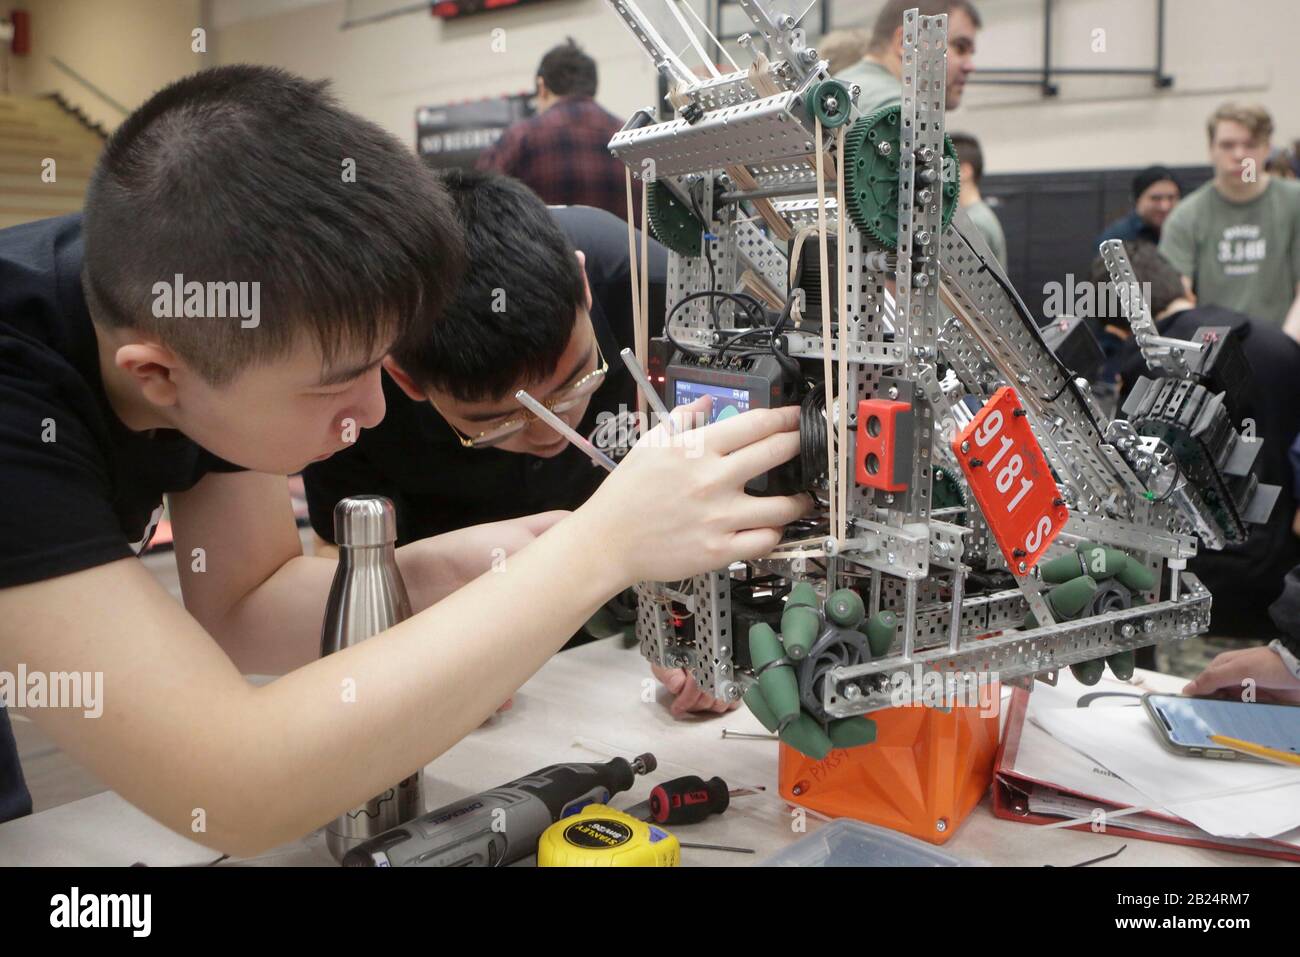 Vancouver, Canada. 29th Feb, 2020. Contestants tune up their robot during  the regional VEX robotics competition in Vancouver, Canada, on Feb. 29, 2020.  Hundreds of high school students teamed up with their